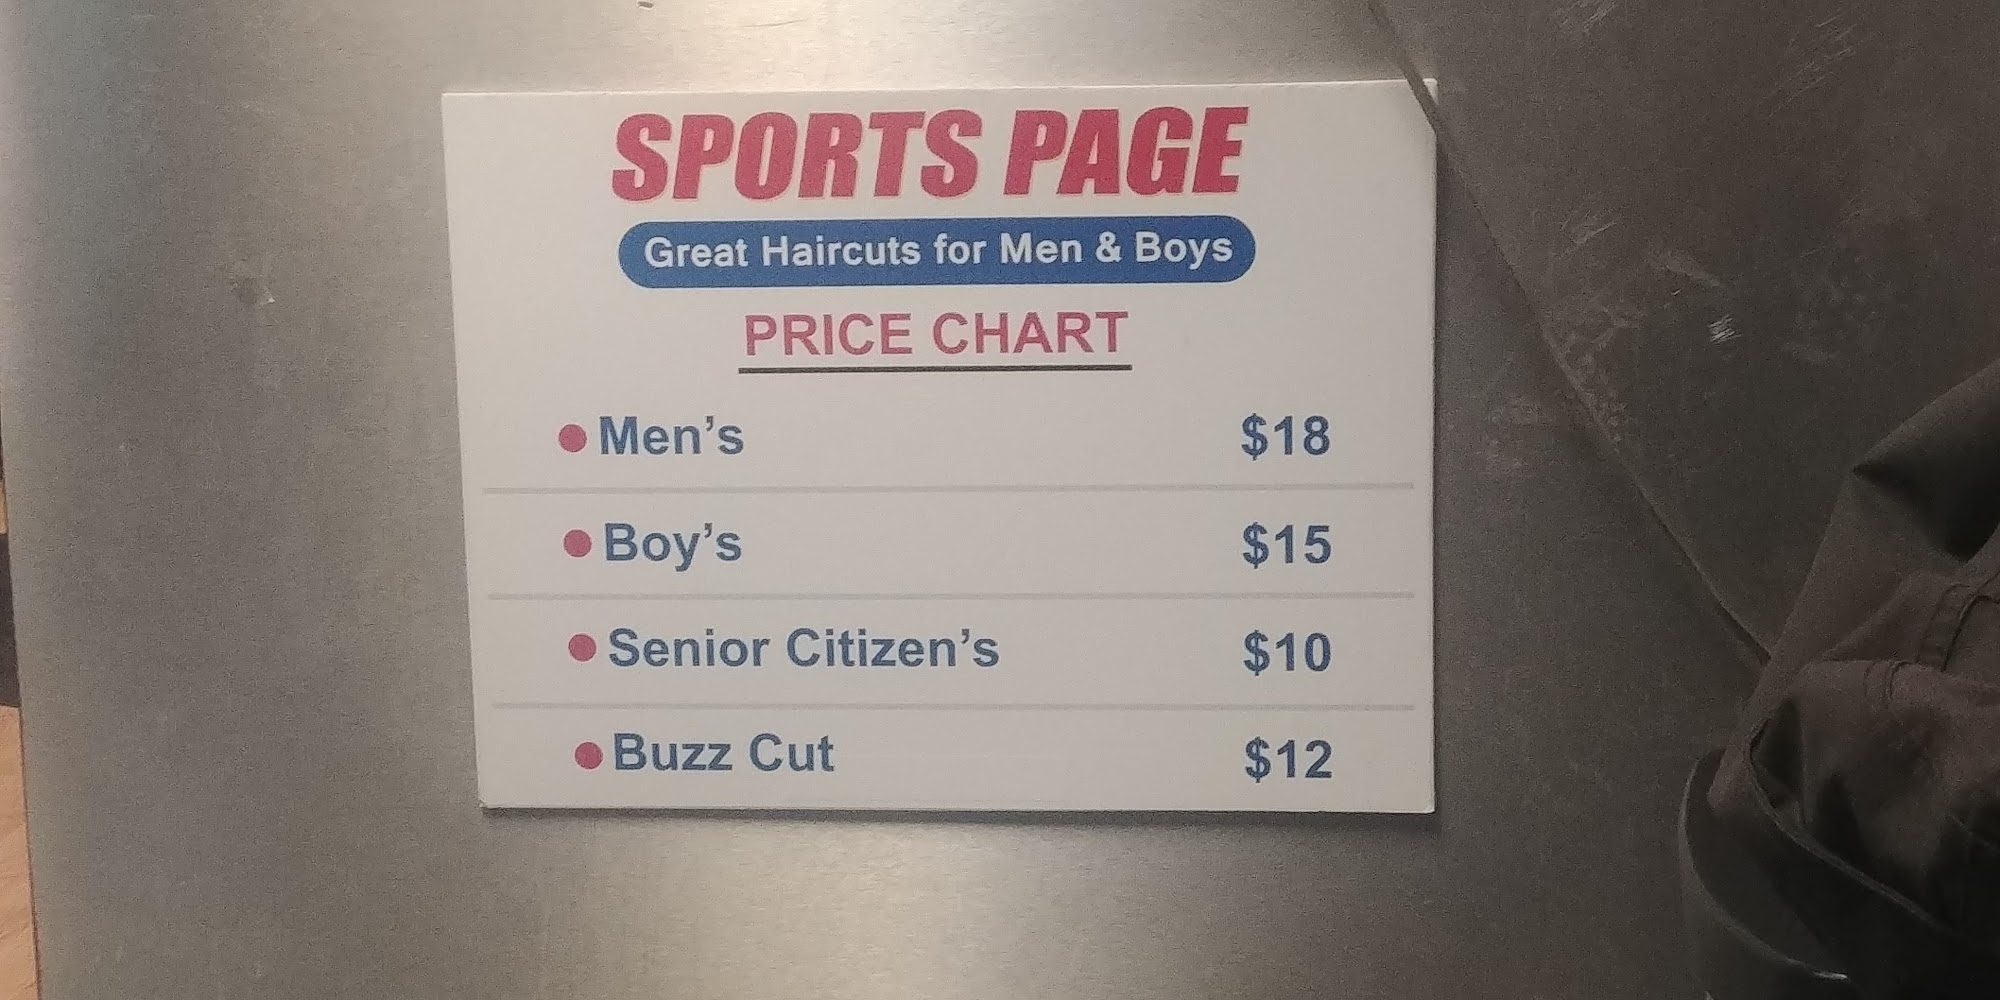 Sports Page Great Hair Cuts for Men & Boys